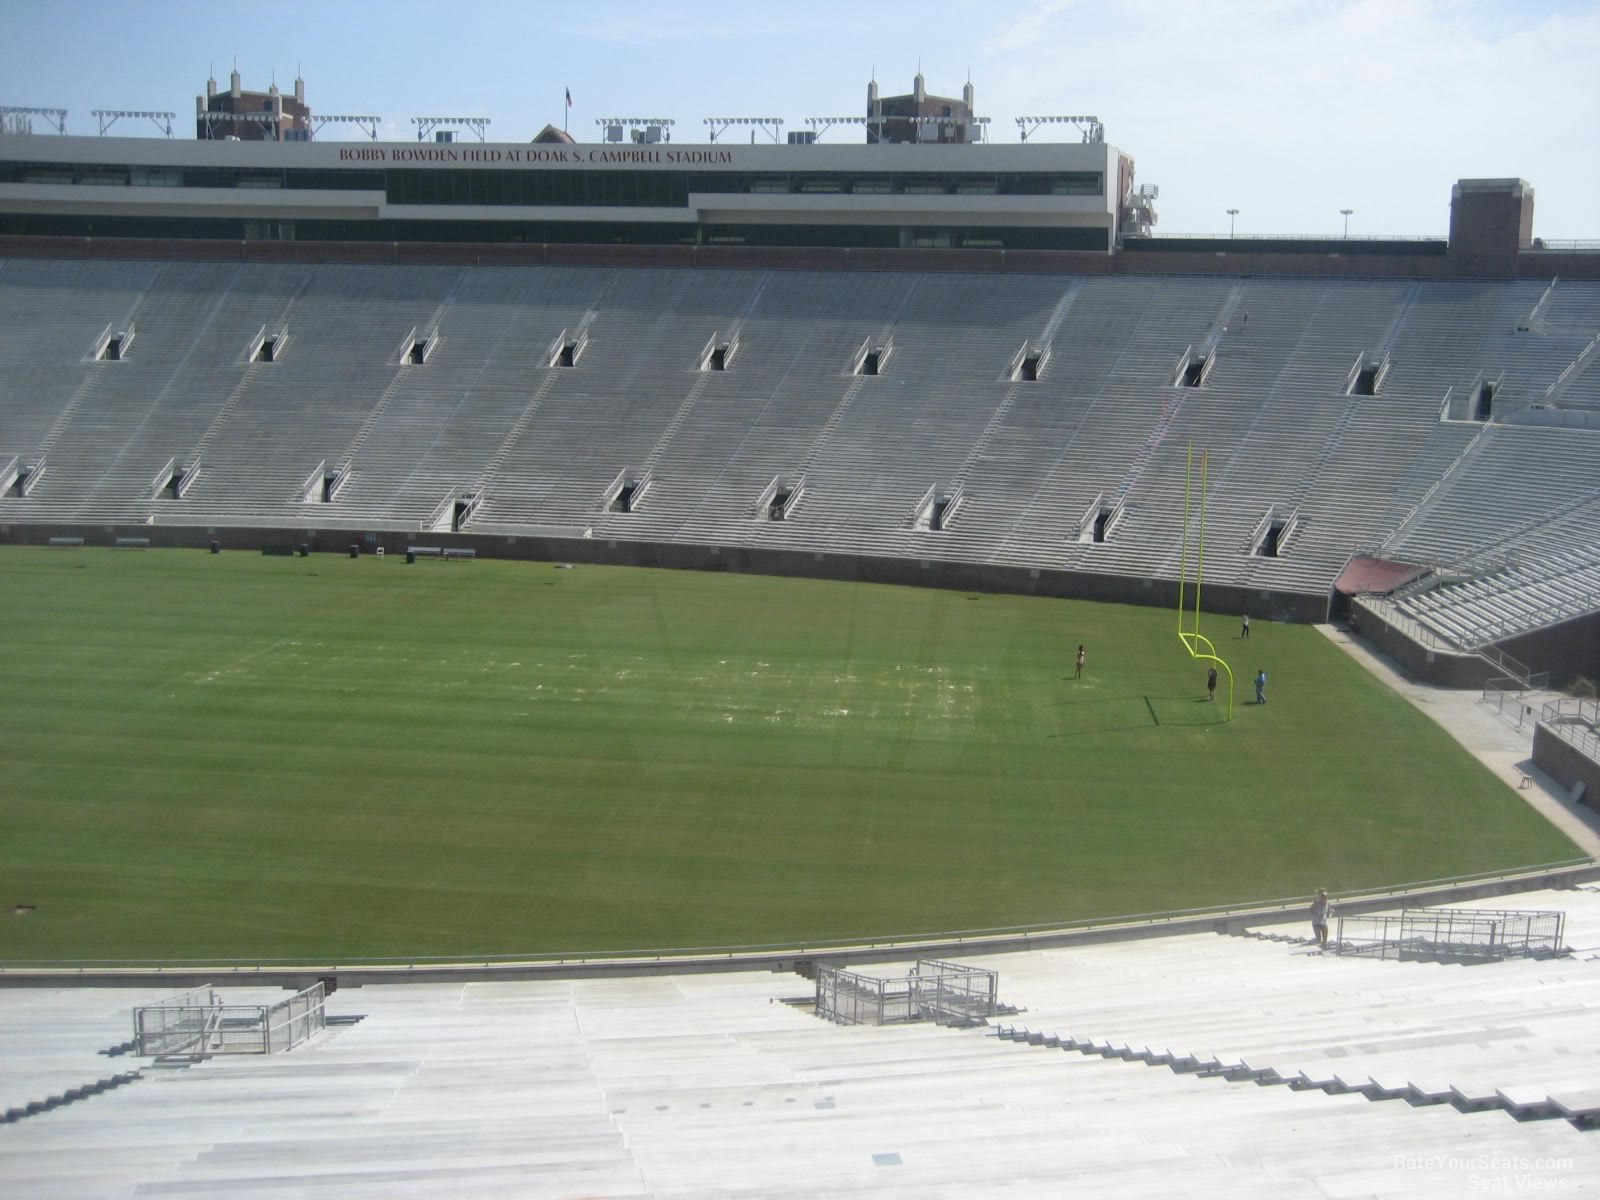 section 30, row 58 seat view  - doak campbell stadium